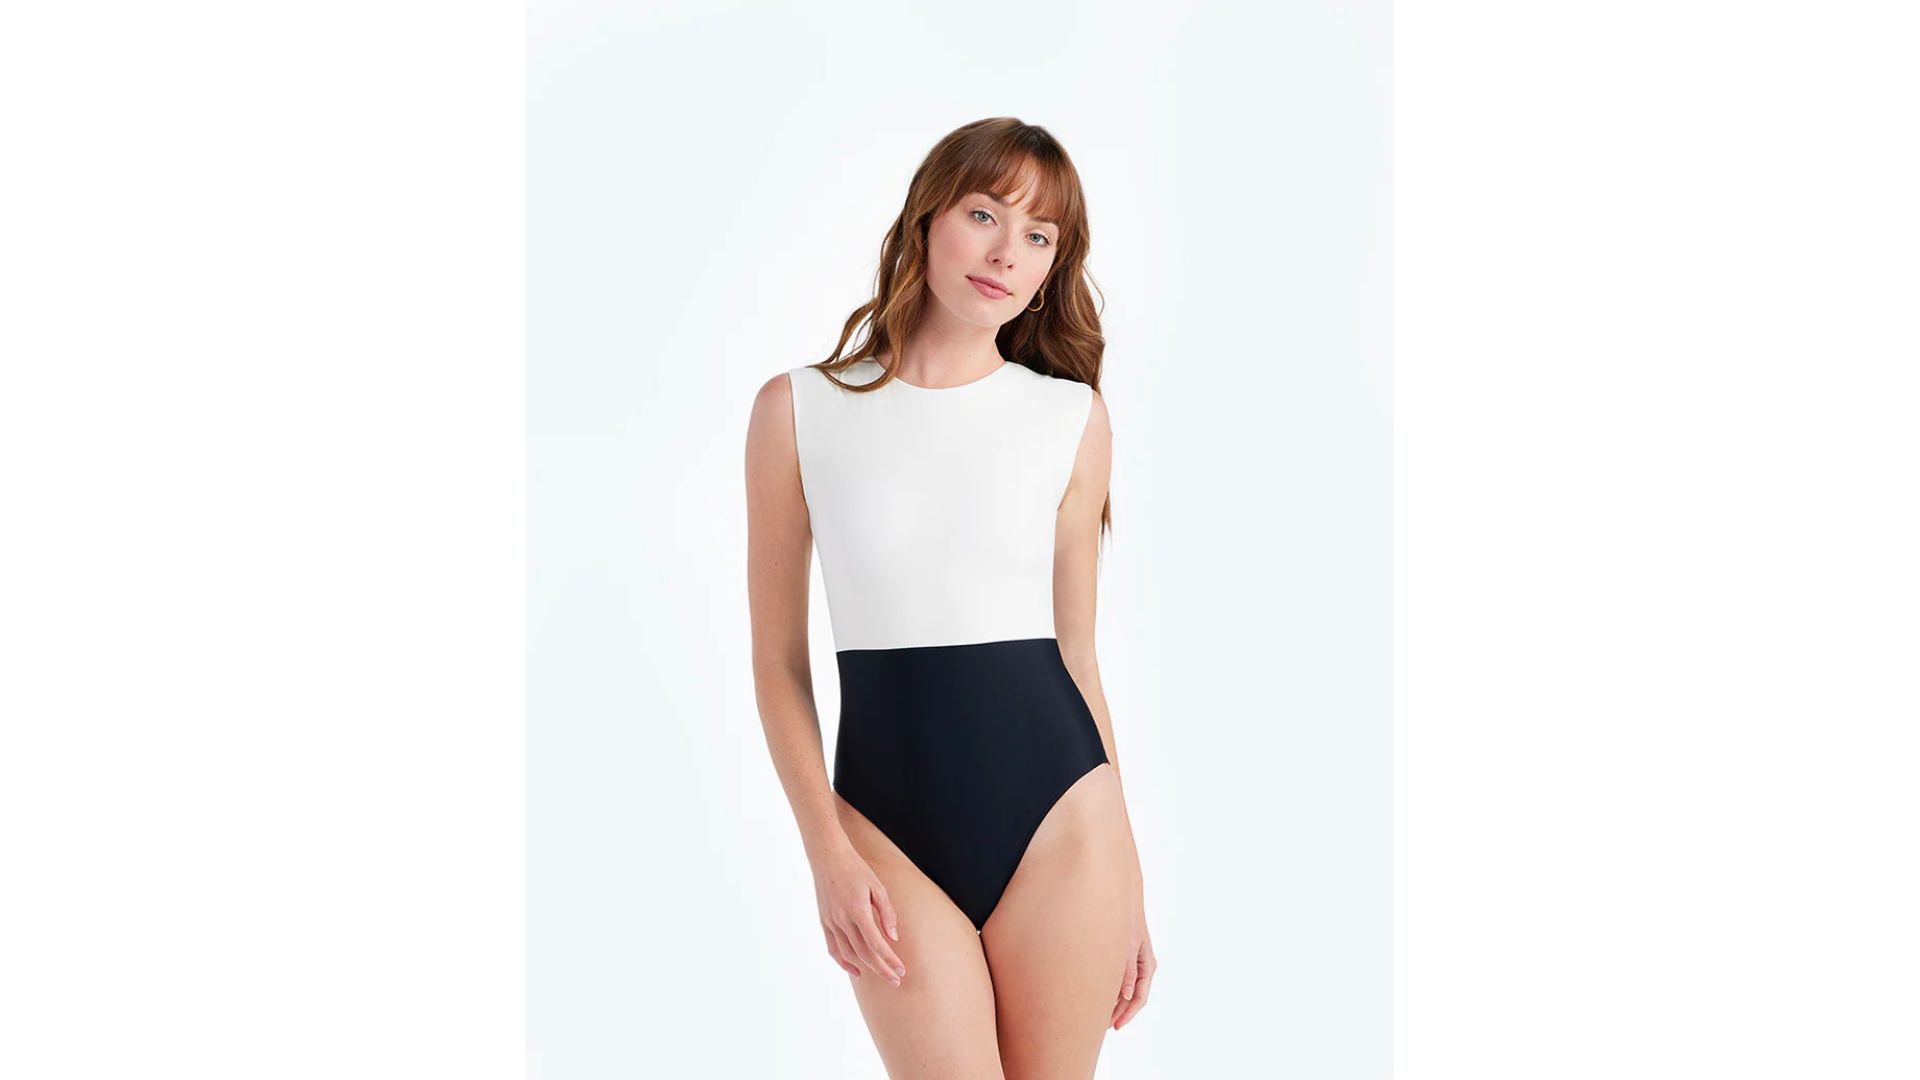 One Piece Swimsuits